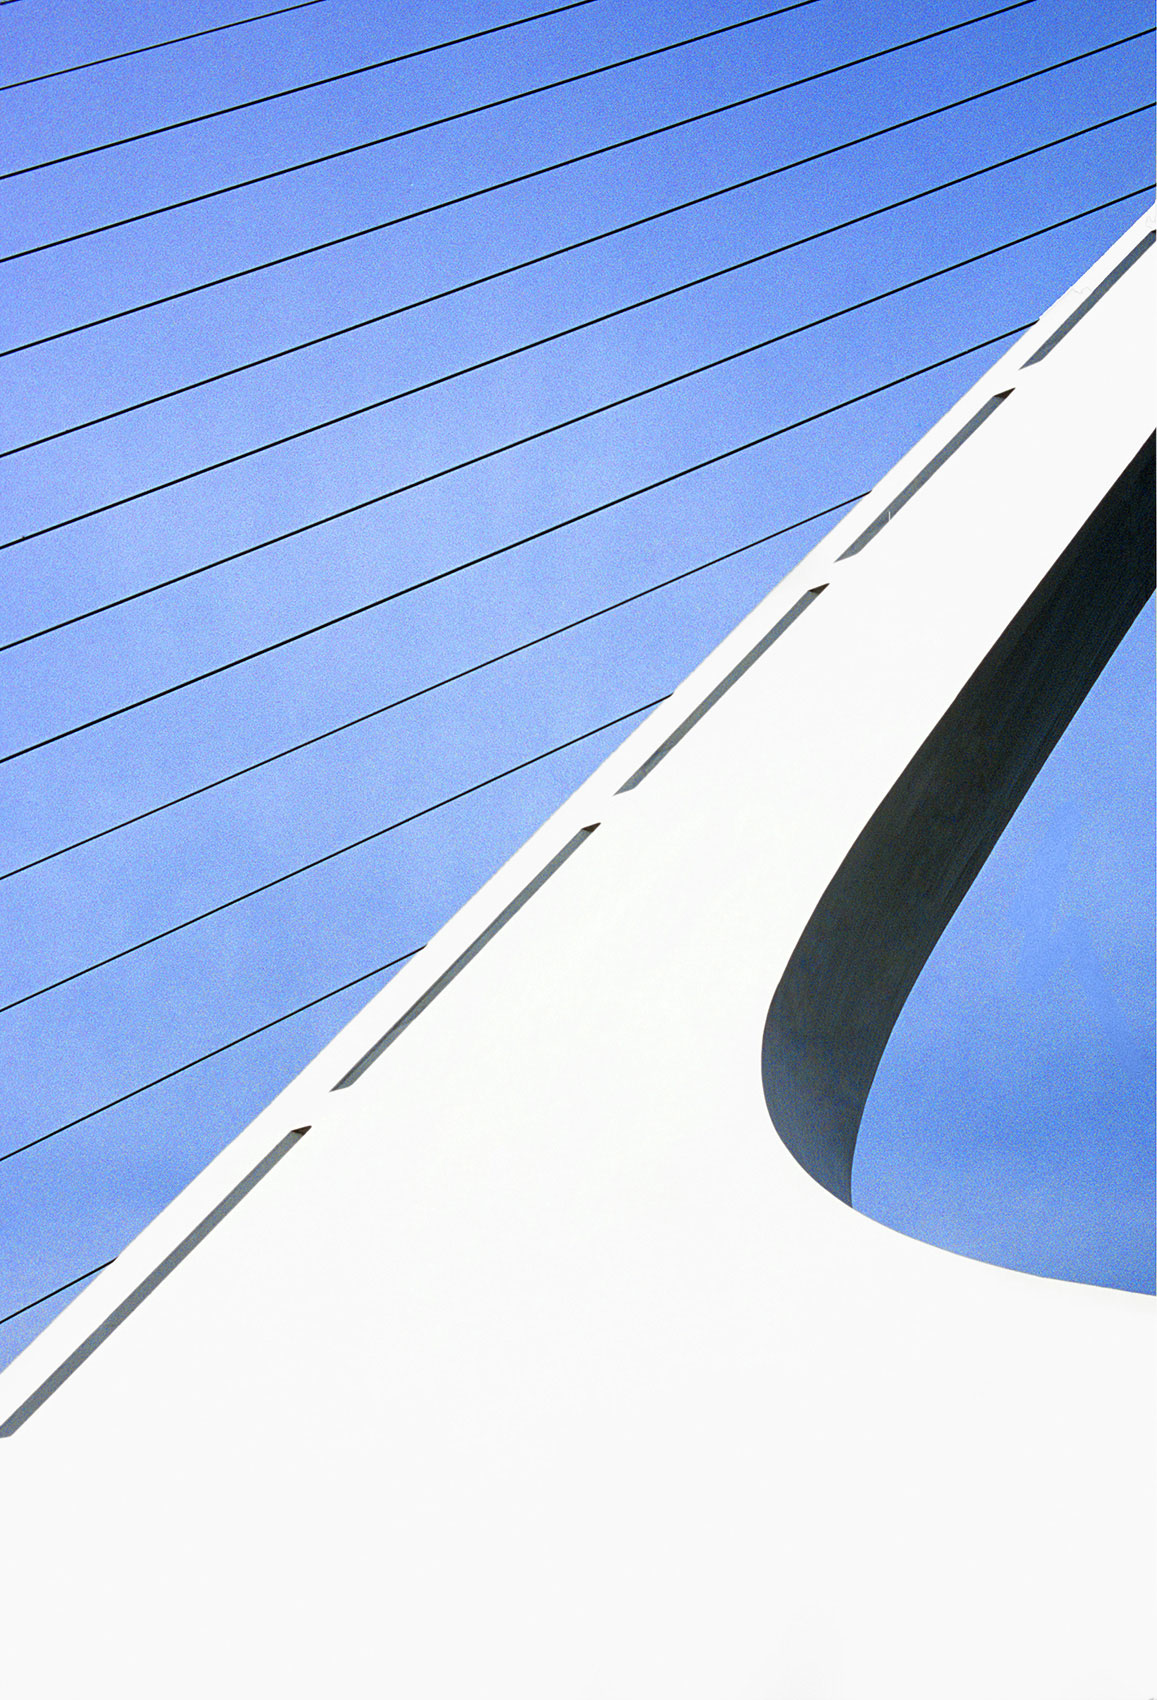 Detail photograph of the Sundial Bridge at Turtle Bay